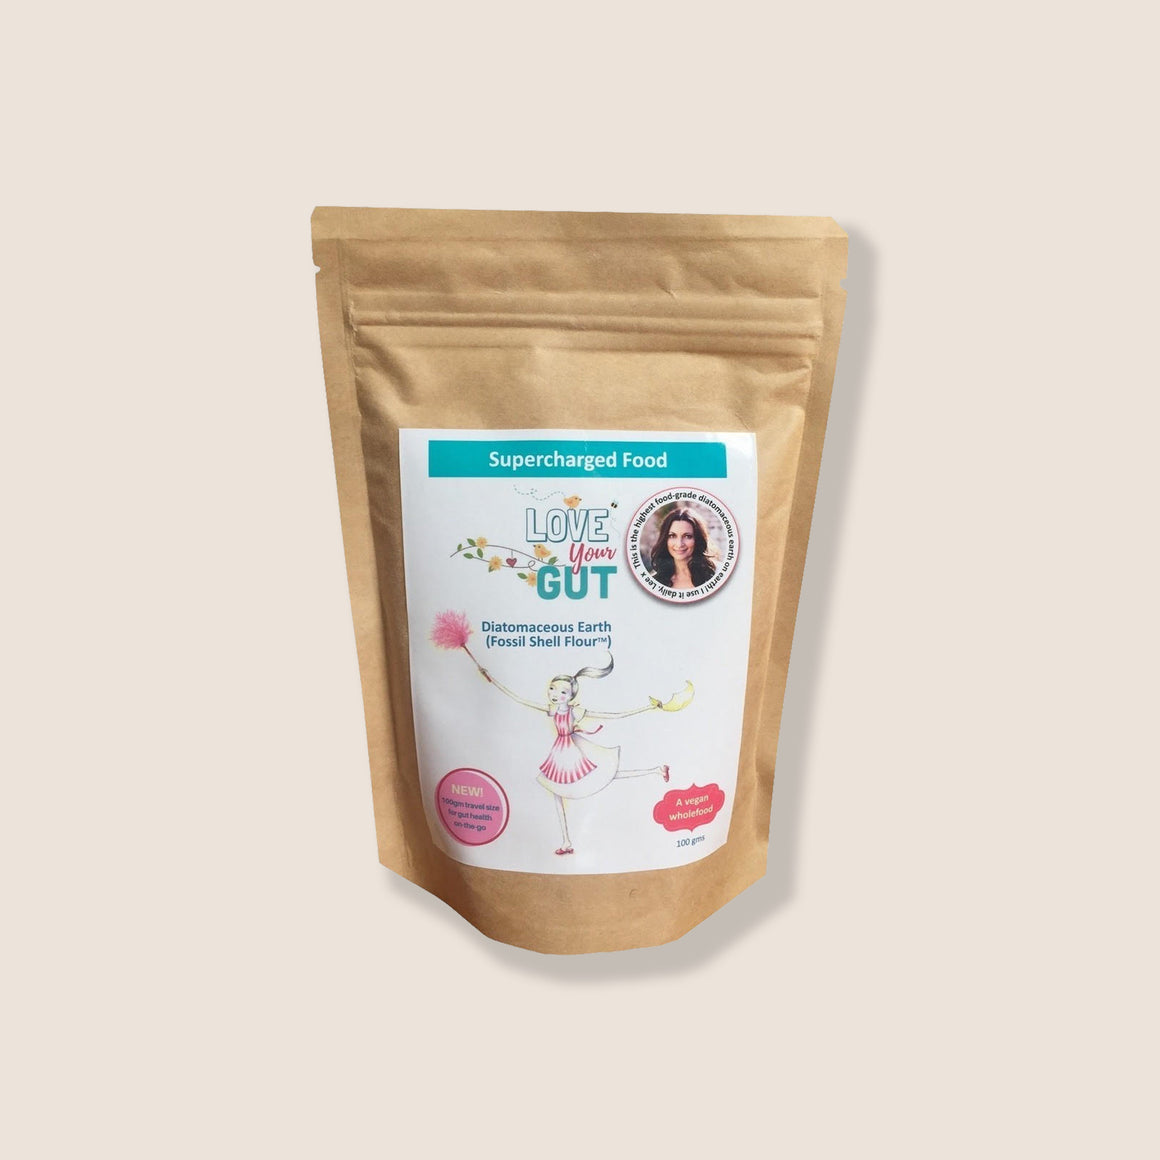 Love Your Gut diatomaceous earth powder, 100g, by Supercharged Food